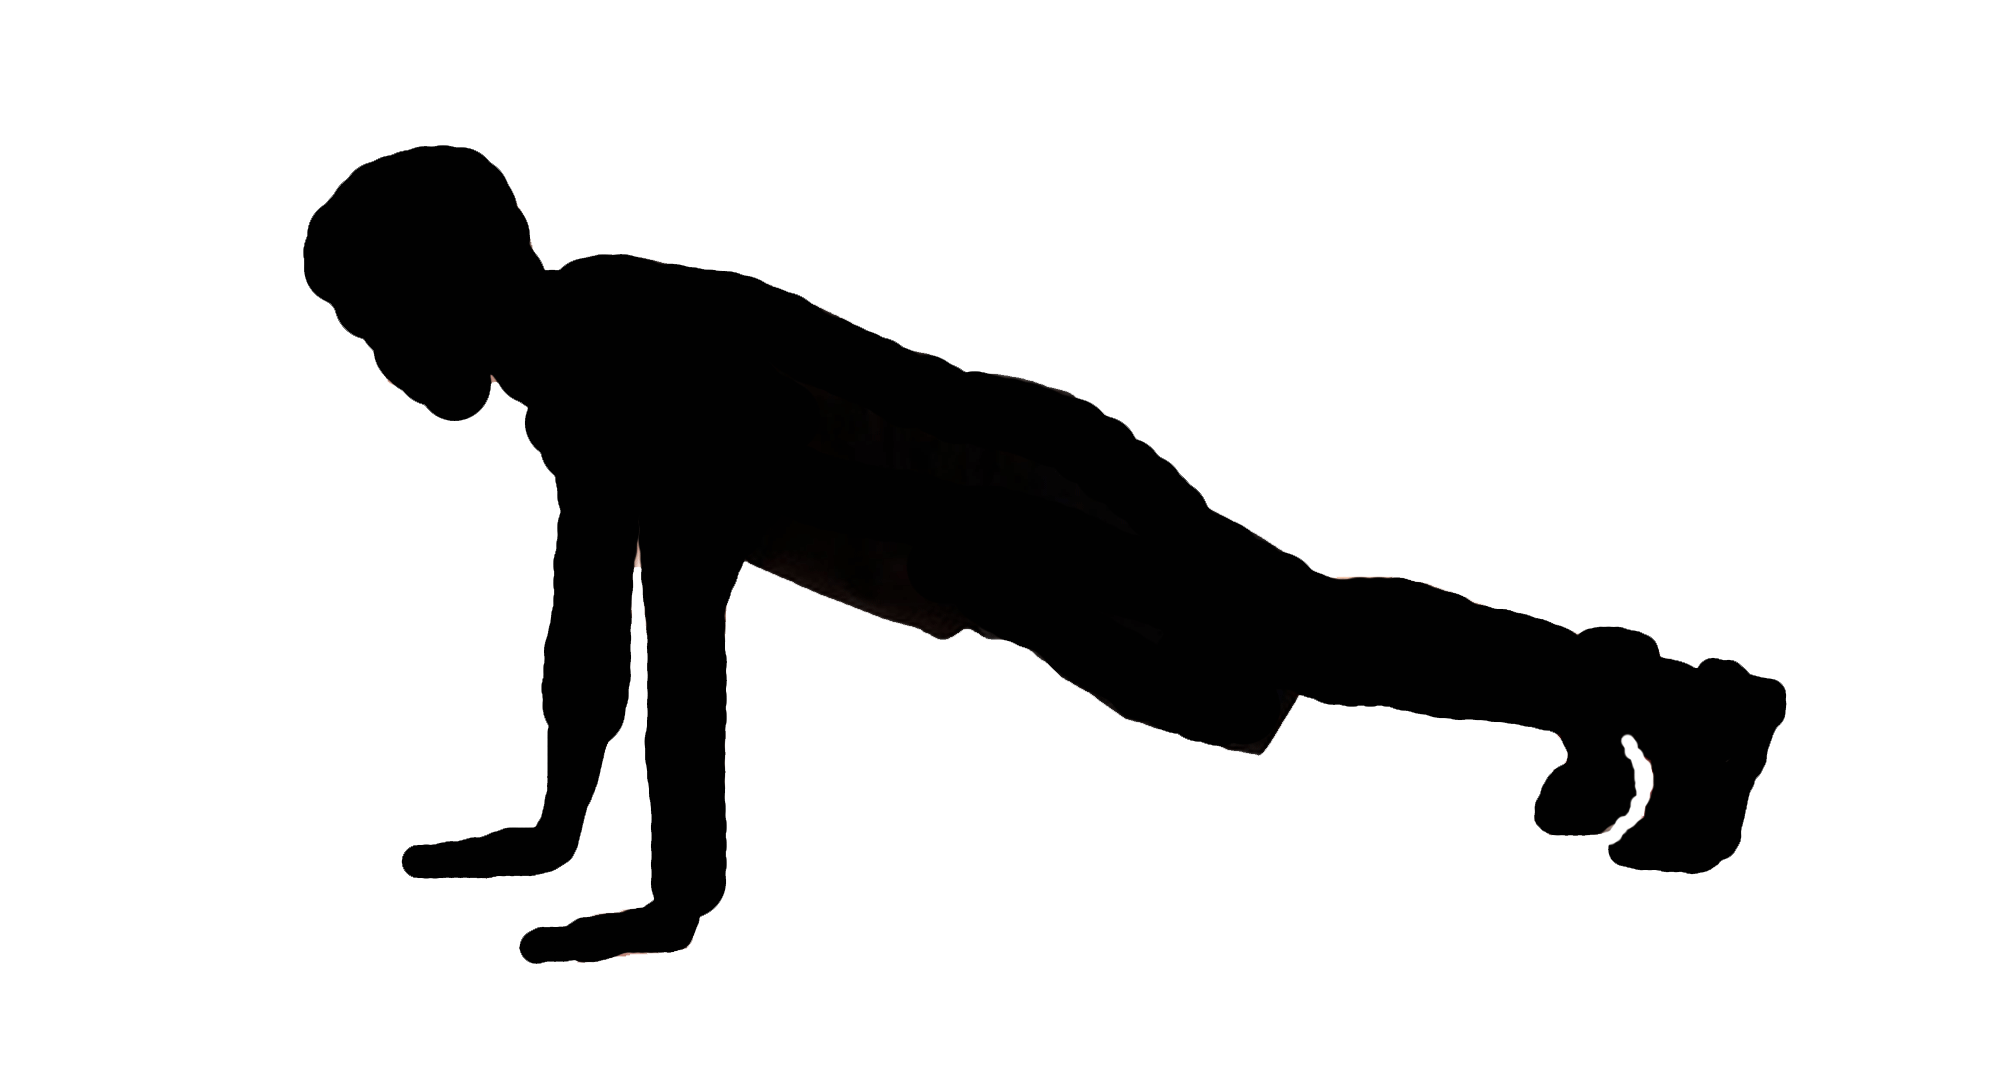 Learn more about push up exercises